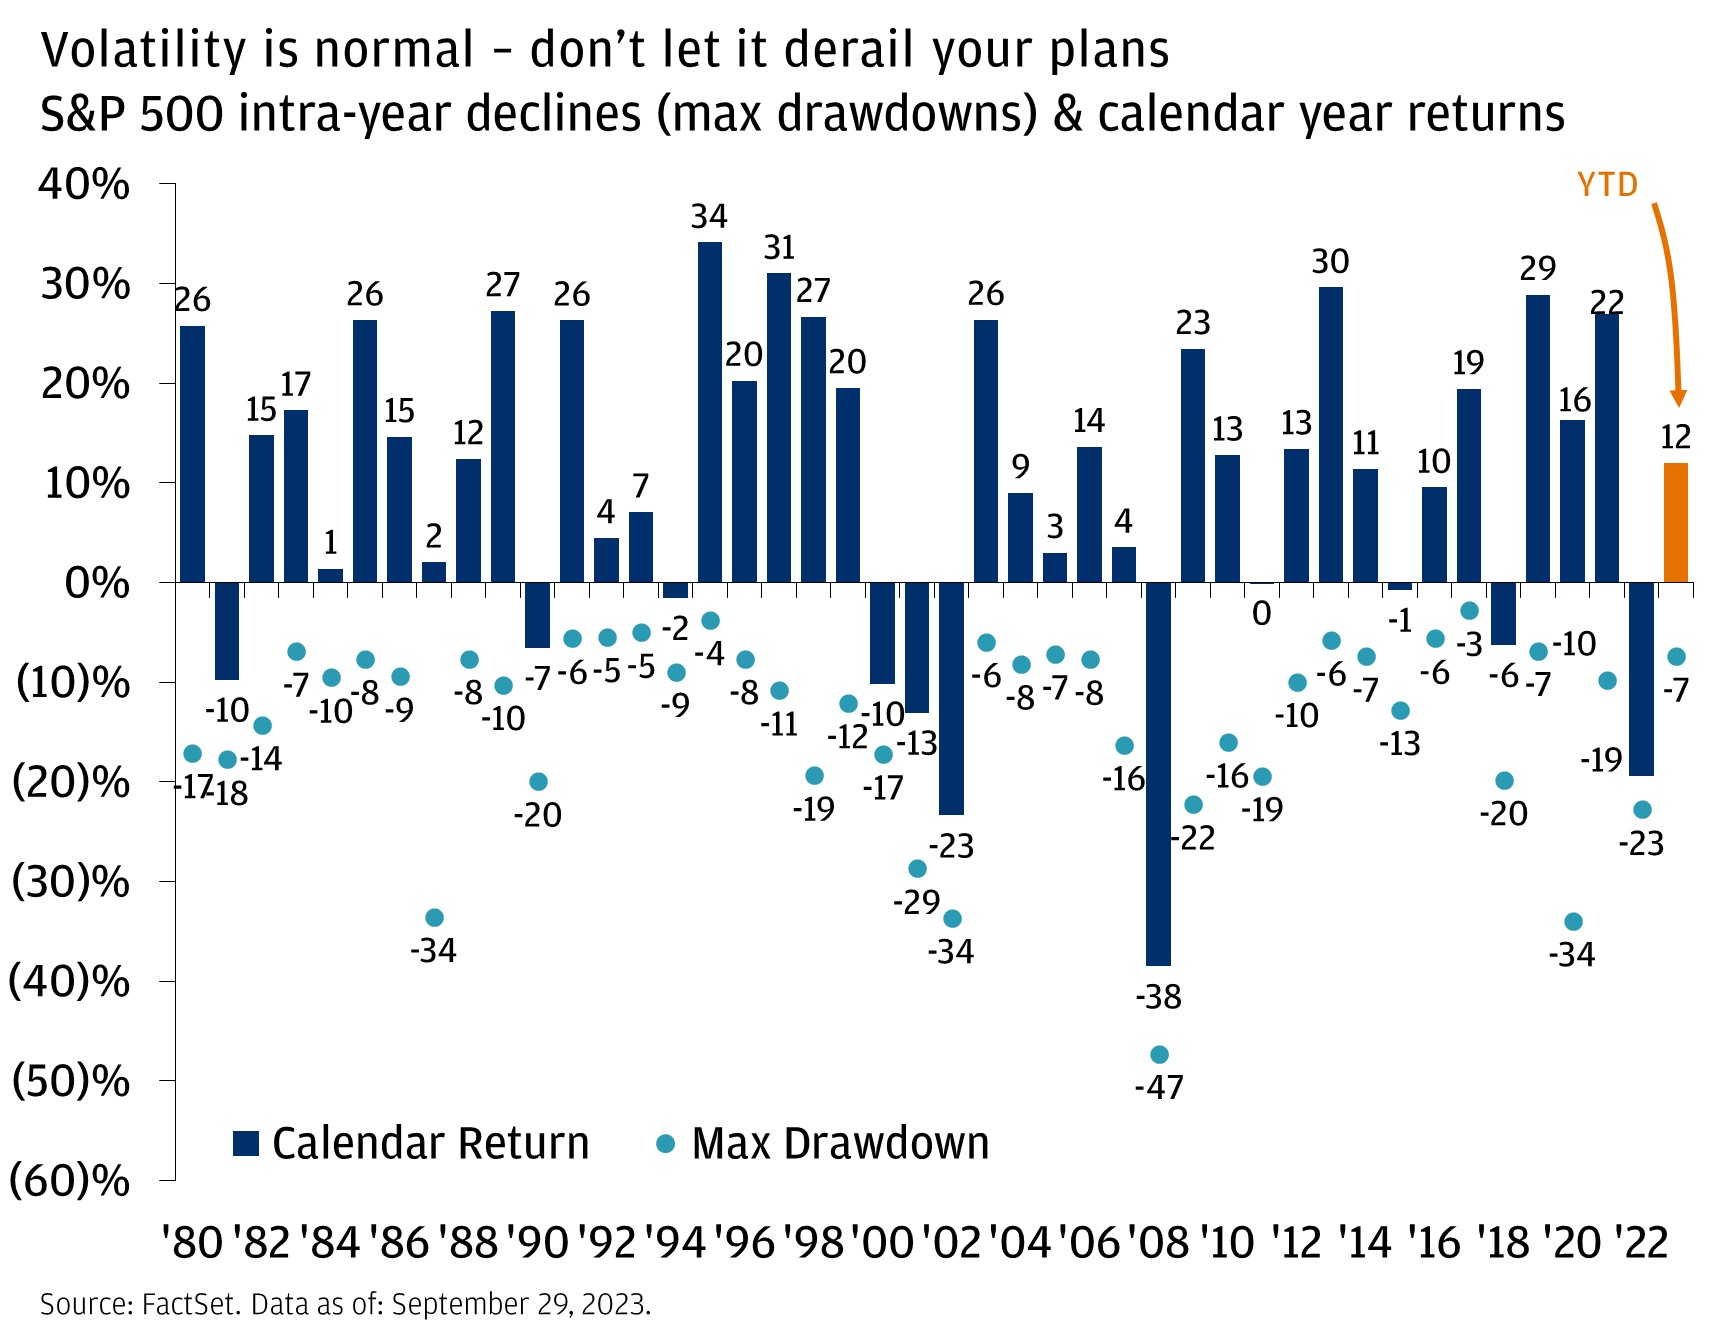 This chart shows how stocks tend to reward long-term investors by showing S&P 500 intra-year declines (max drawdowns) & calendar year returns.   The bars represent the calendar year returns.  1980: 25 1981: -10 1982: 16 1983: 17 1984: 0 1985: 26 1986: 17 1987: 0 1988: 13 1989: 26 1990: -6 1991: 24 1992: 8 1993: 7 1994: -2 1995: 33 1996: 23 1997: 26 1998: 30 1999: 18 2000: -9 2001: -13 2002: -24 2003: 27 2004: 9 2005: 4 2006: 13 2007: 3 2008: -41 2009: 30 2010: 12 2011: -1 2012: 13 2013: 30 2014: 14 2015: -1 2016: 8 2017: 19 2018: -7 2019: 30 2020: 15 2021: 22 2022: -20 2023: 12  The dots represent the S&P 500 intra-year declines (max drawdowns) 1980: -17 1981: -18 1982: -15 1983: -7 1984: -13 1985: -8 1986: -9 1987: -34 1988: -8 1989: -8 1990: -20 1991: -6 1992: -6 1993: -5 1994: -9 1995: -3 1996: -8 1997: -11 1998: -19 1999: -12 2000: -17 2001: -30 2002: -34 2003: -14 2004: -8 2005: -7 2006: -8 2007: -10 2008: -47 2009: -28 2010: -16 2011: -19 2012: -10 2013: -6 2014: -7 2015: -12 2016: -8 2017: -3 2018: -20 2019: -7 2020: -34 2021: -5 2022: -24 2023: -7  There is also a “YTD” note and an arrow from that note pointing to the last bar which is at 17 for the current year of 2023.